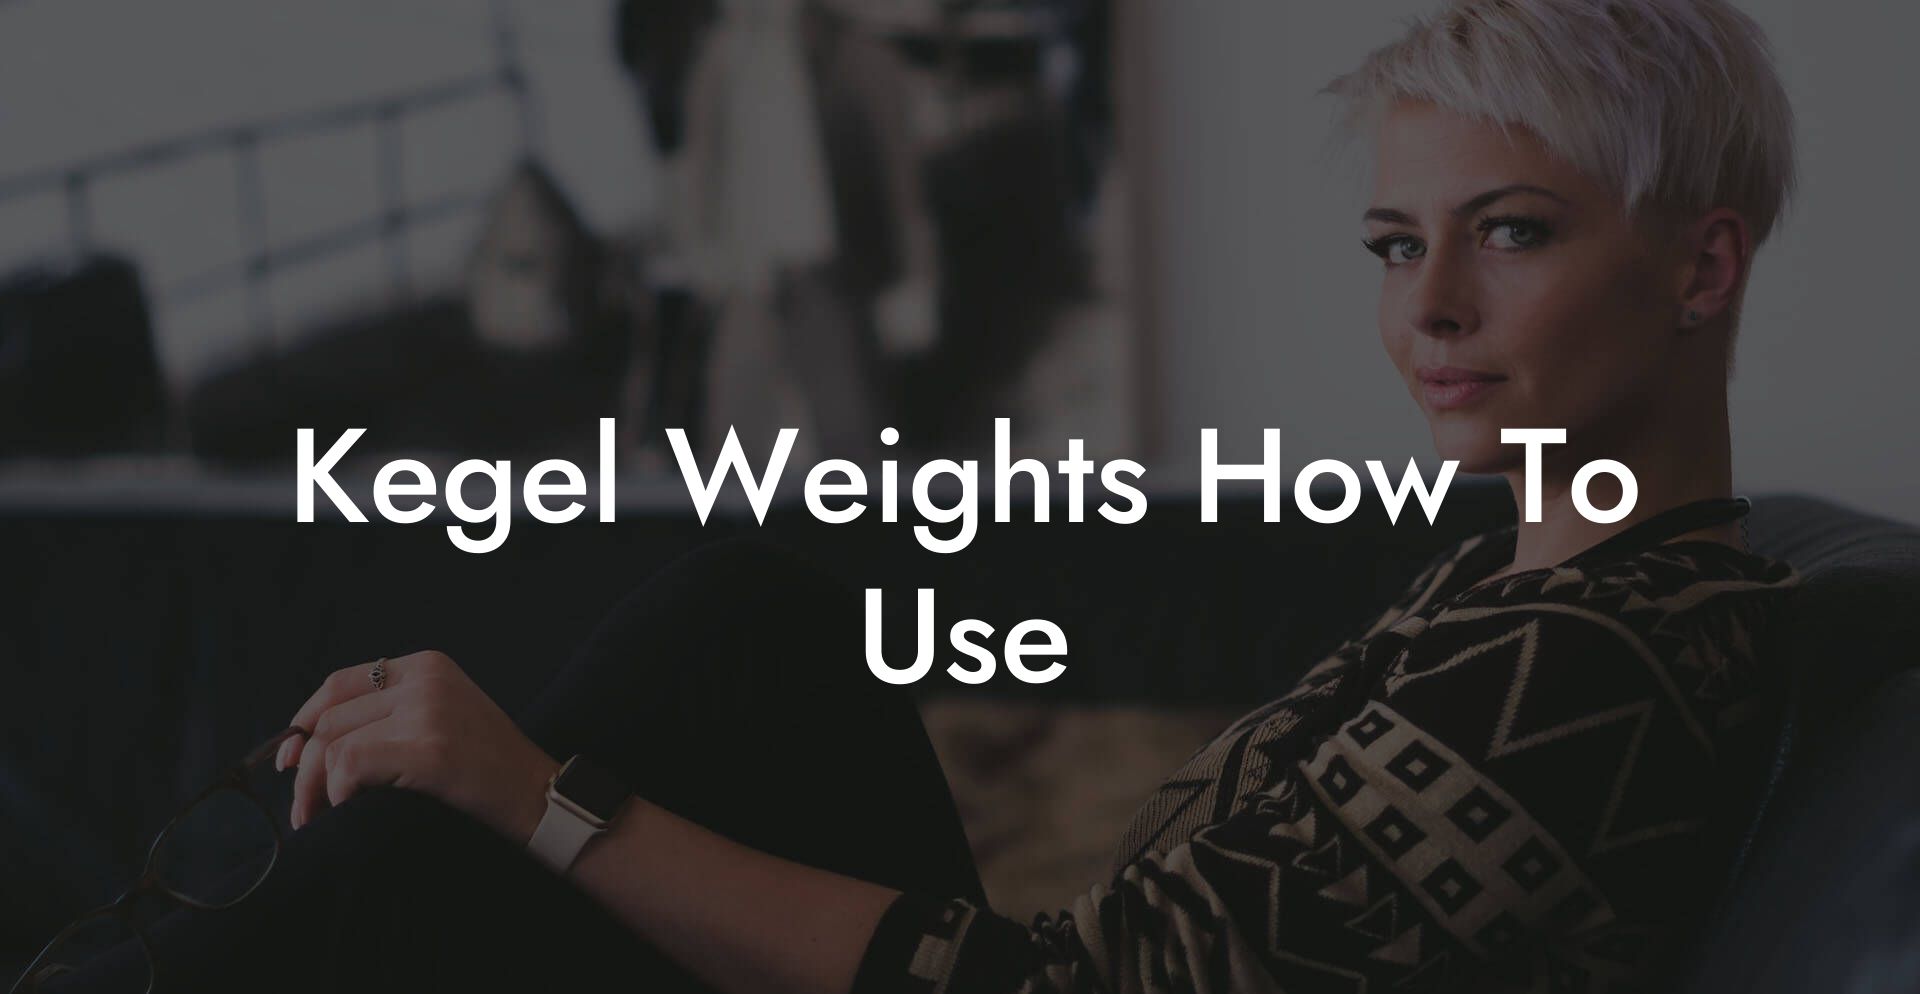 Kegel Weights How To Use